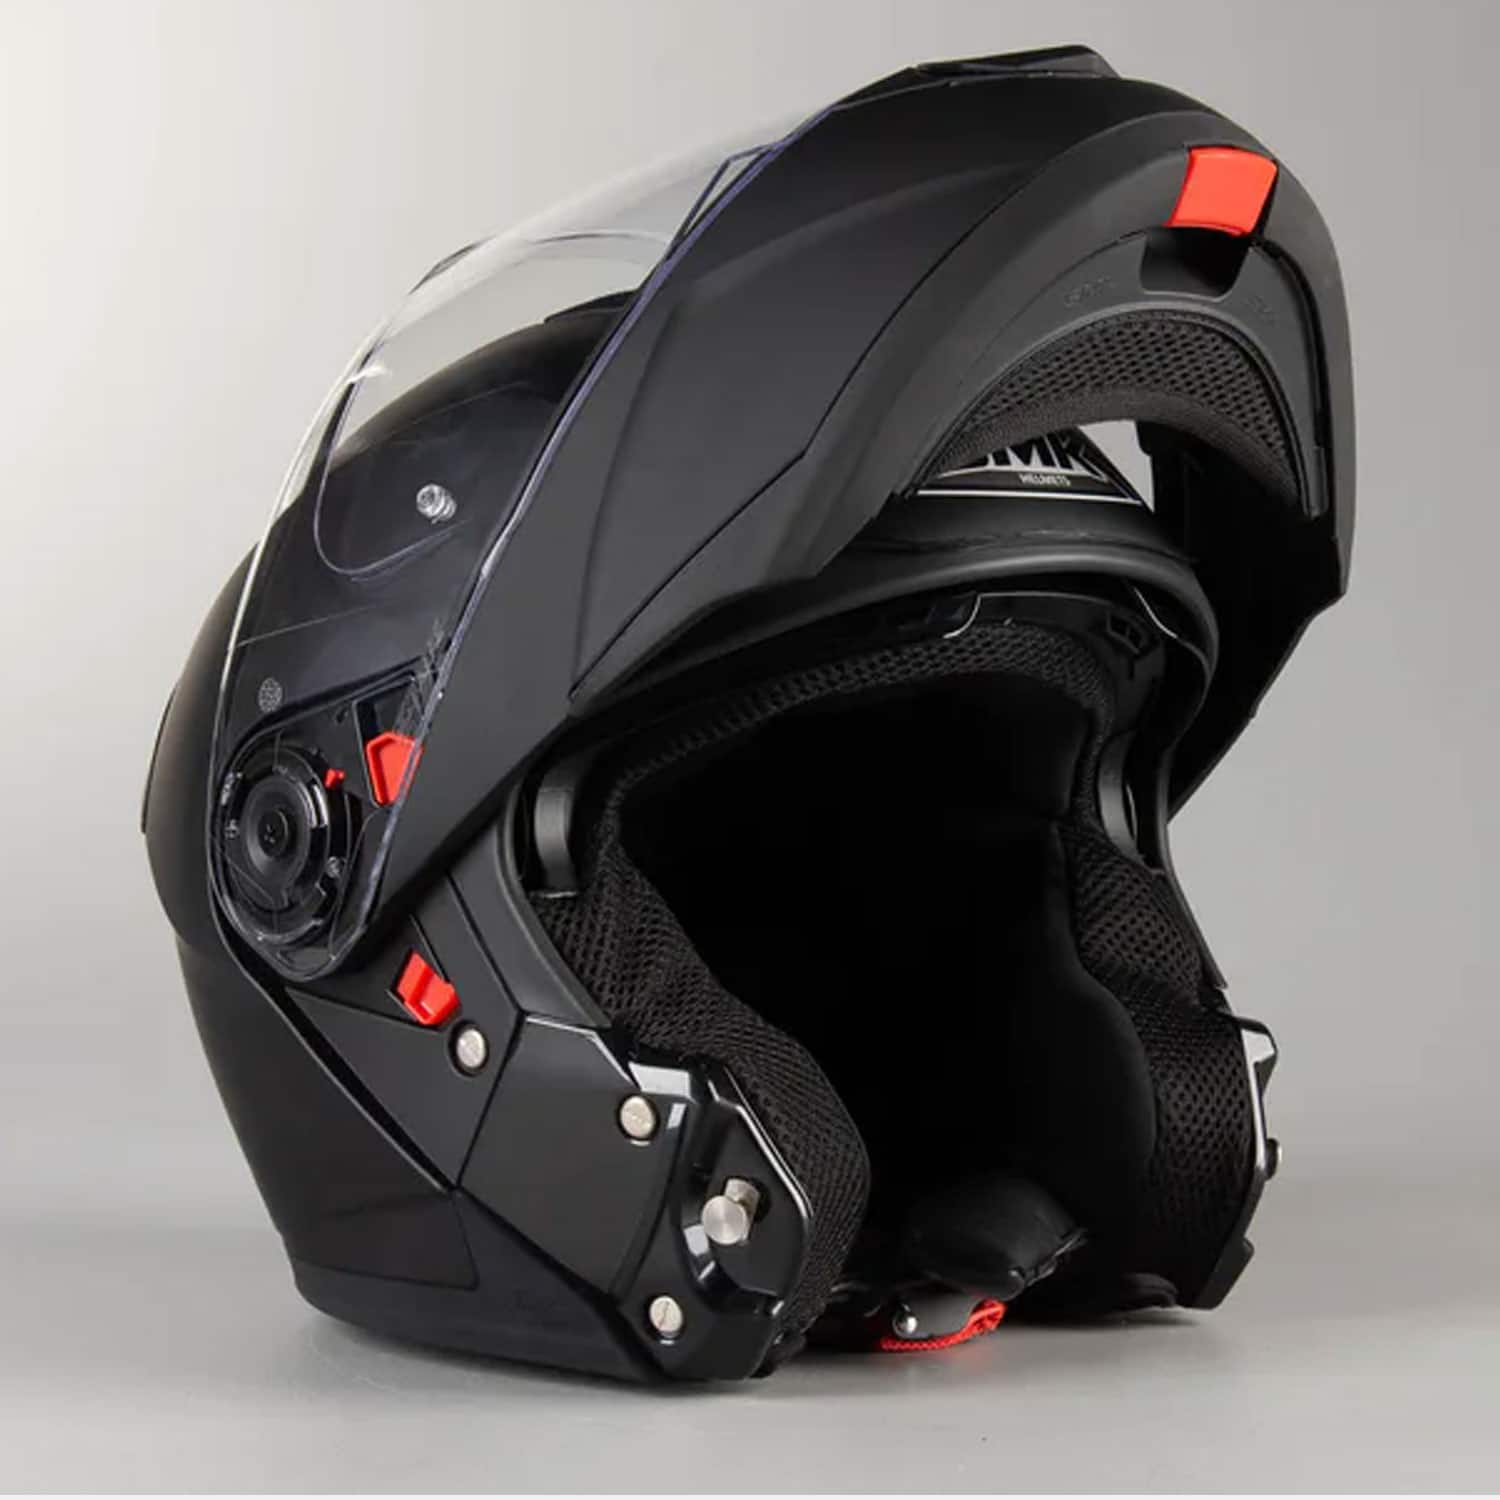 Casque intégral SMK Twister Blade ma256 taille S 